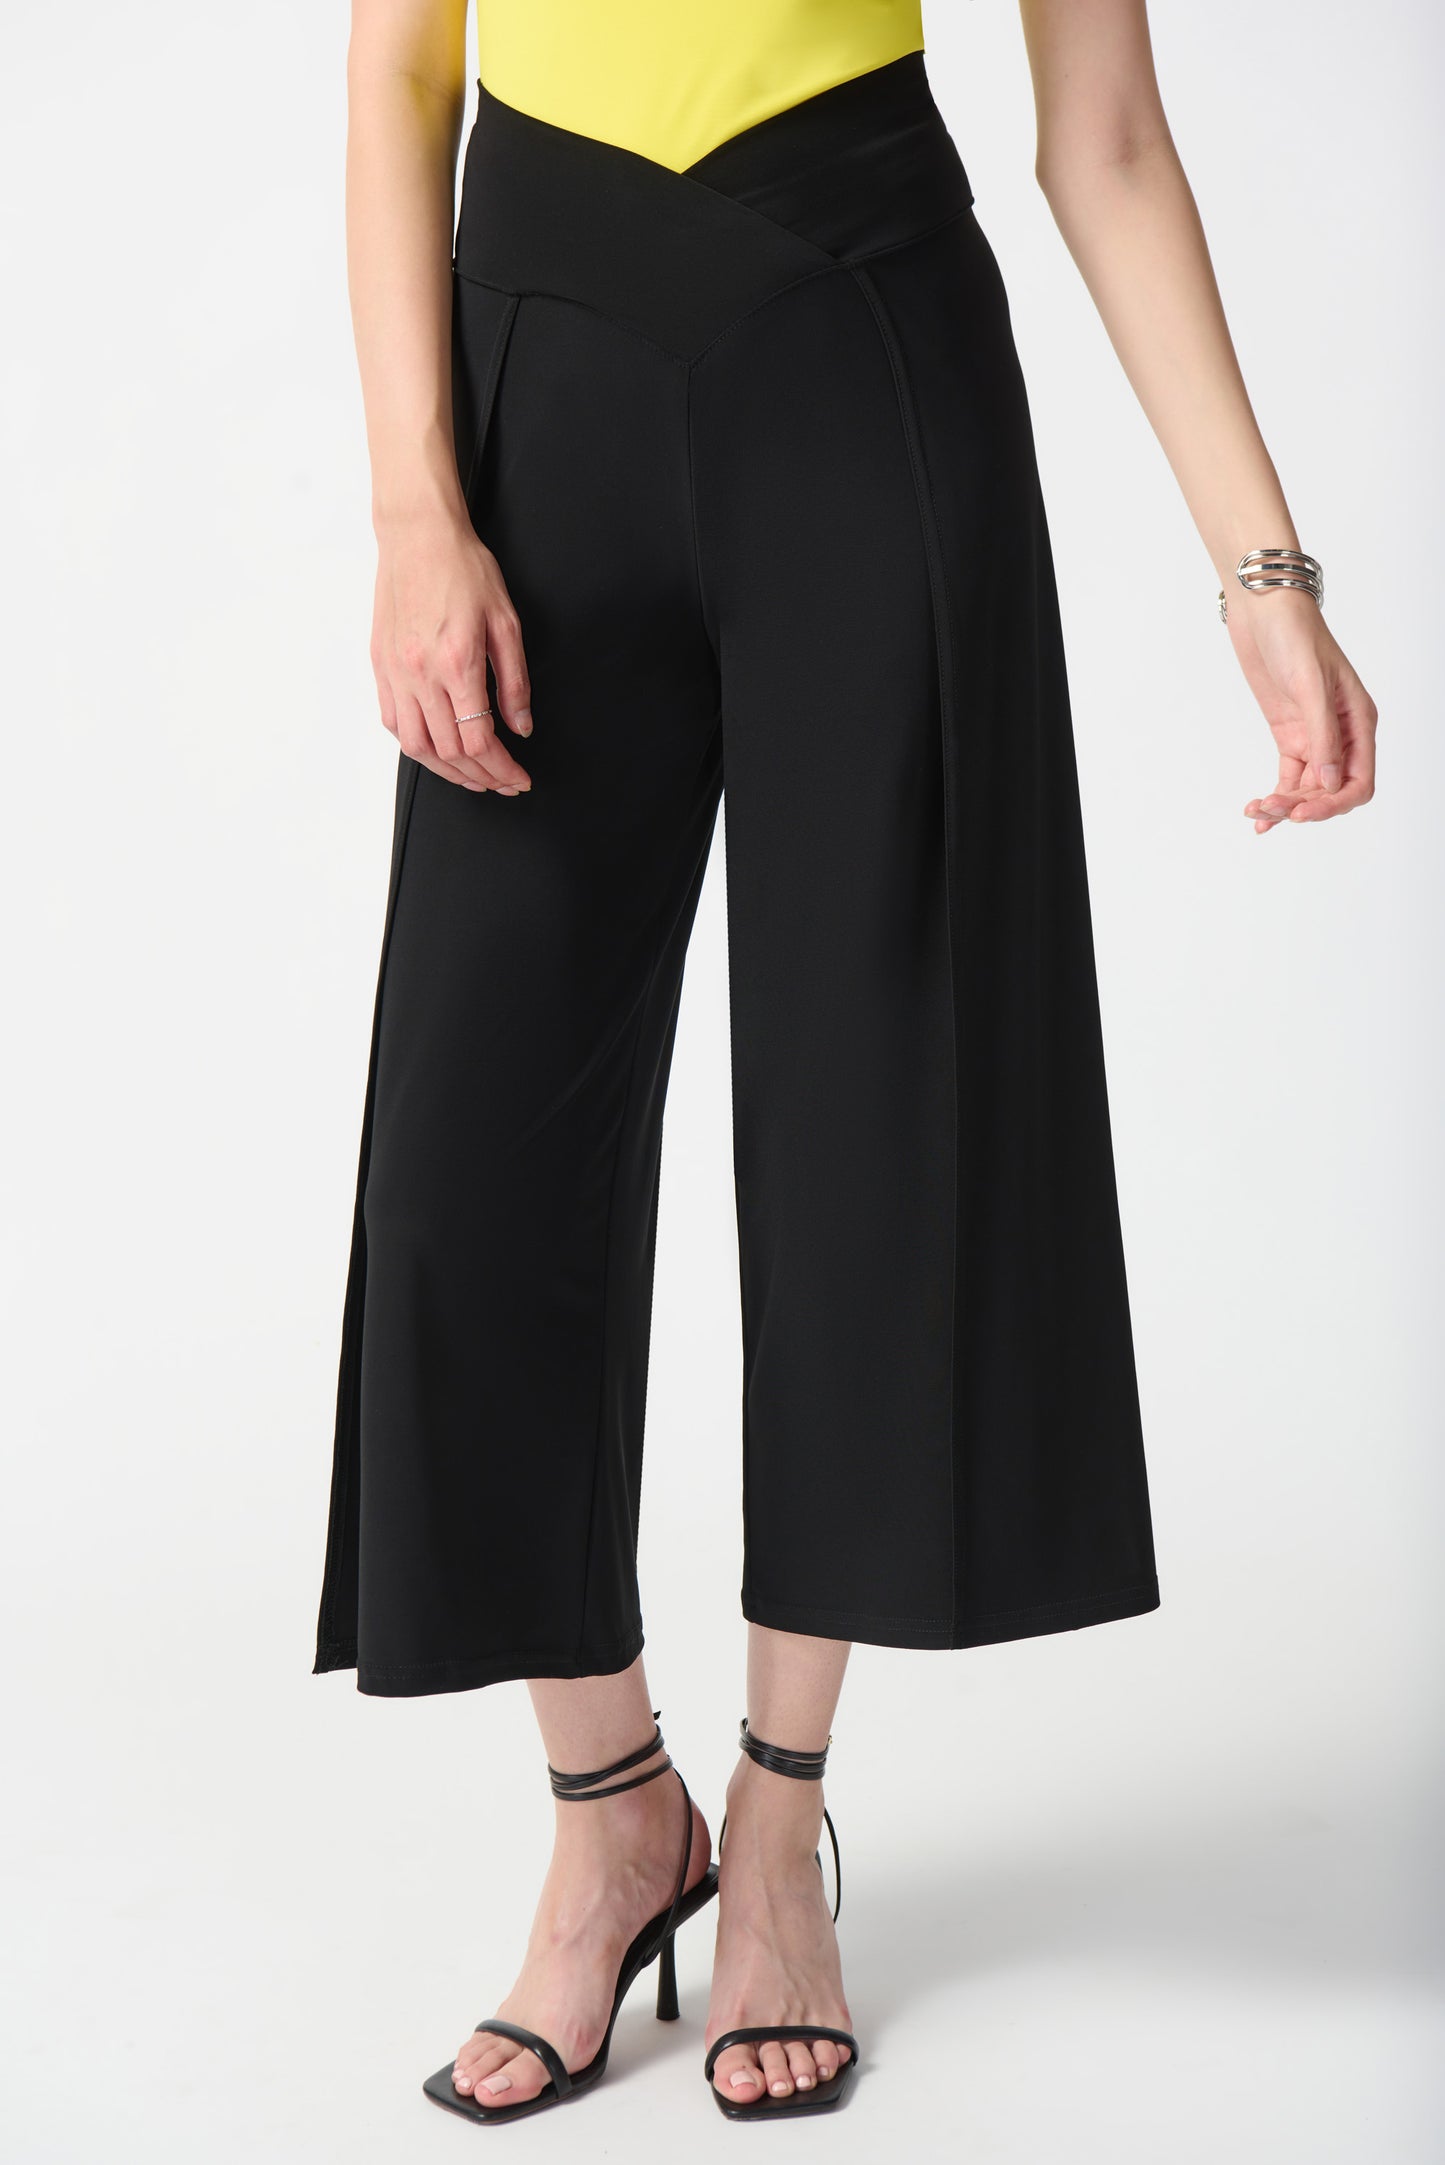 Silky Knit Pull-On Culotte Pants
242026